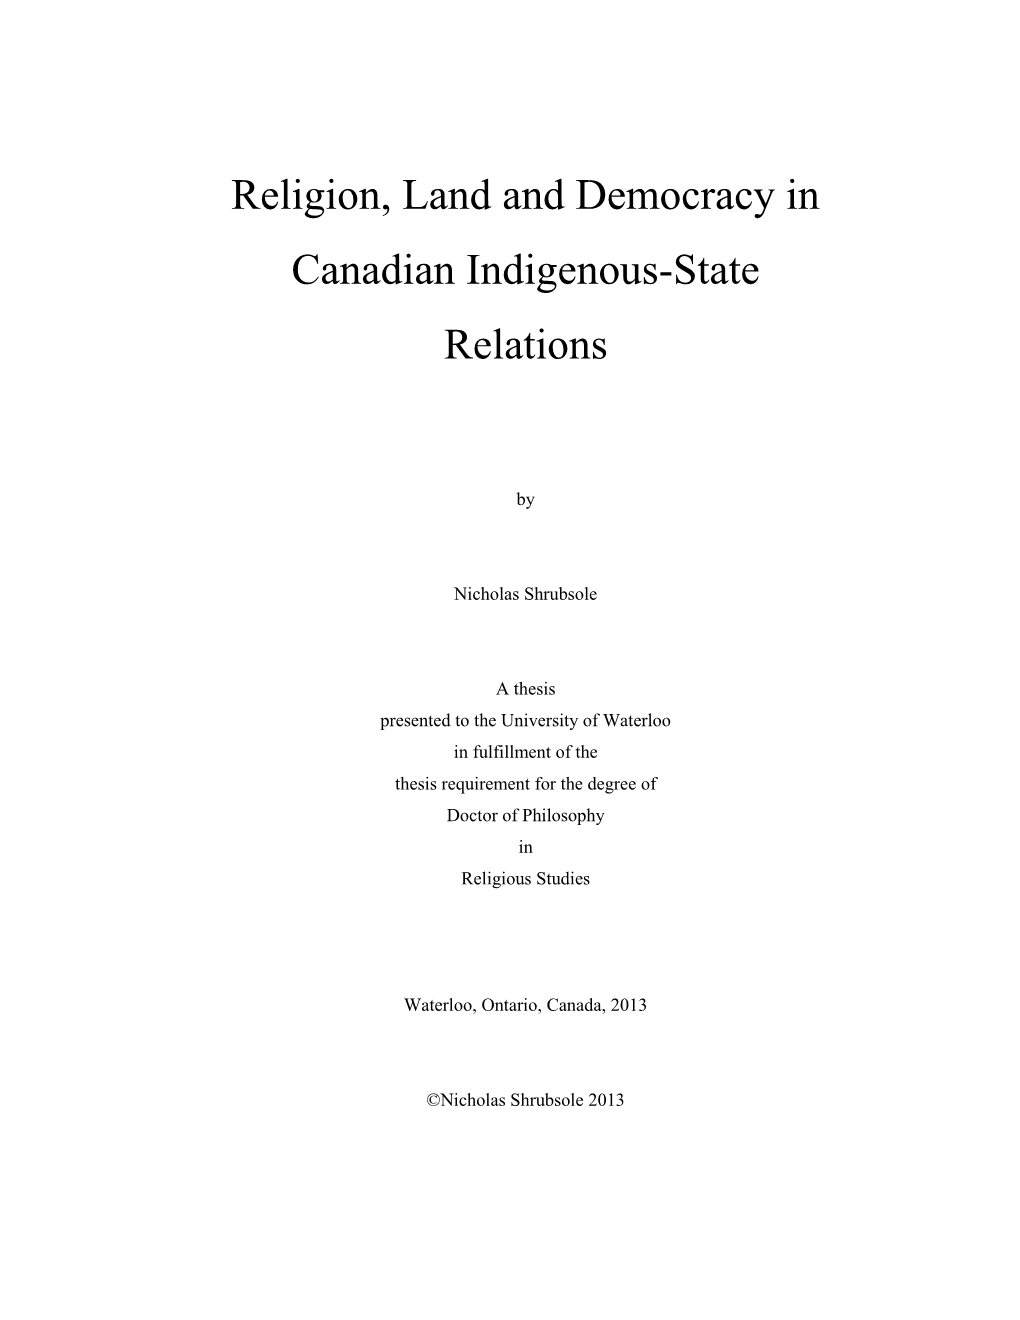 Religion, Land and Democracy in Canadian Indigenous-State Relations